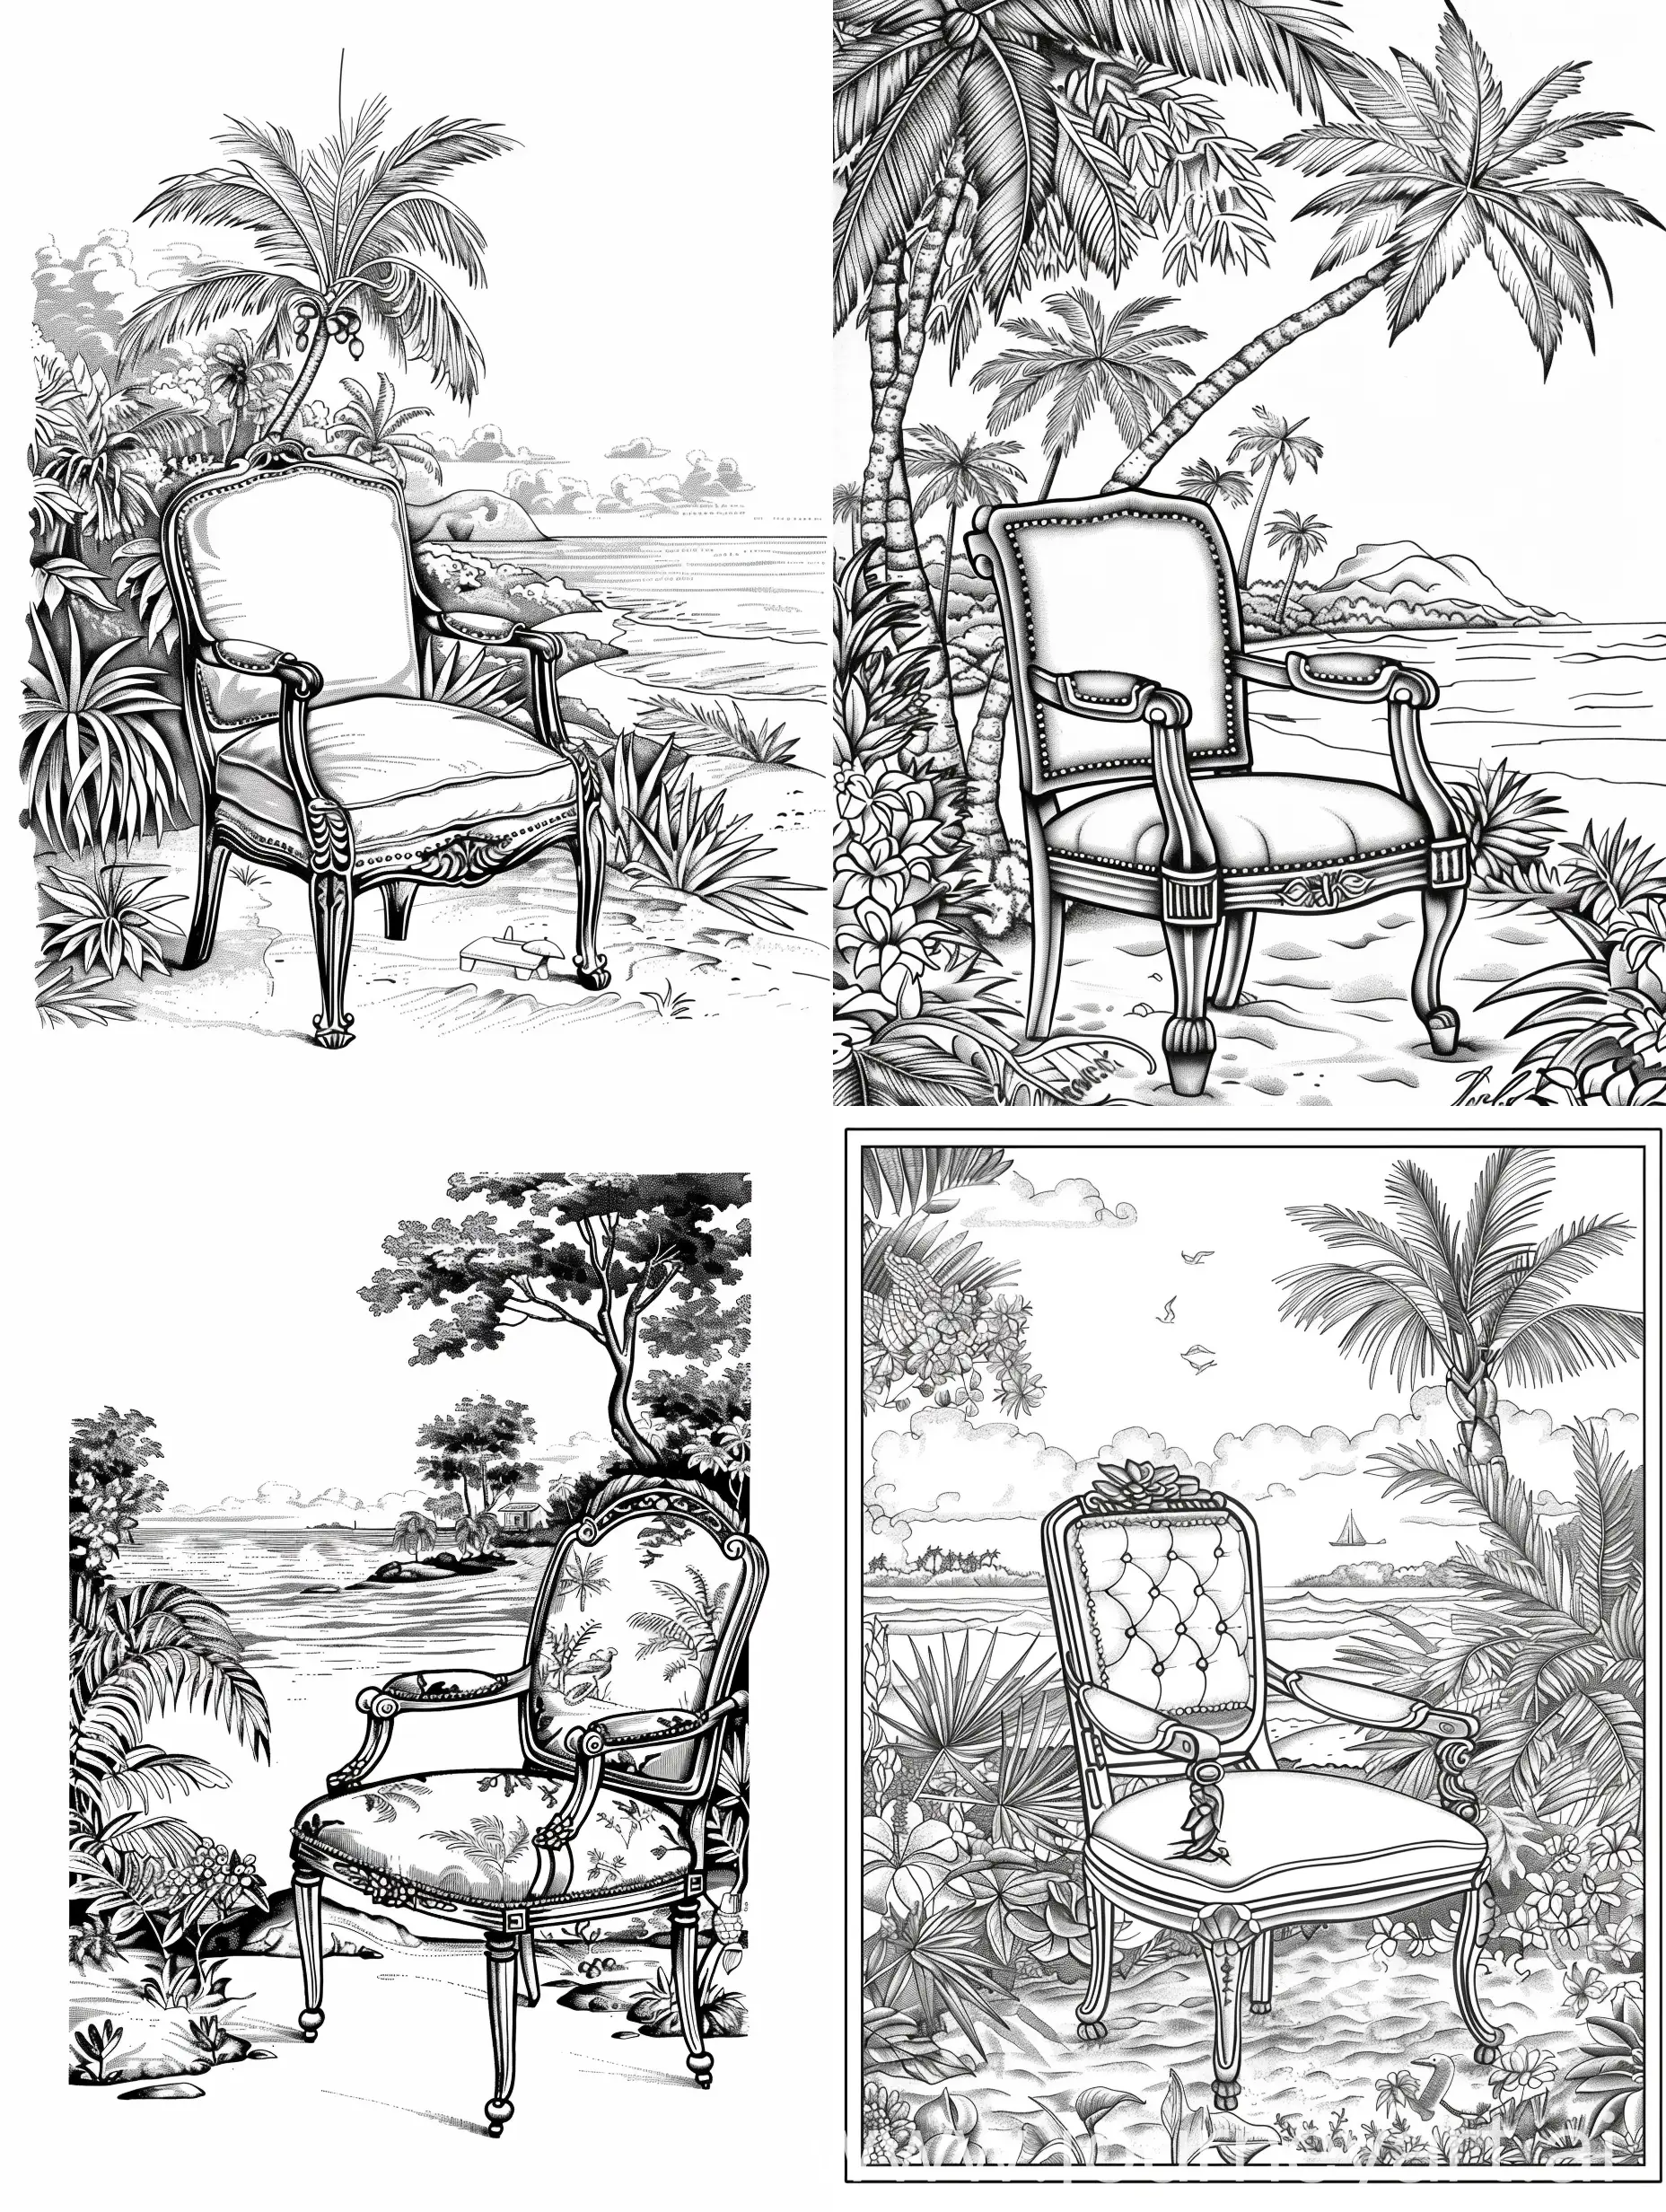 coloring book page, Colonial-Era chair and beach scenes , Black and white, white background